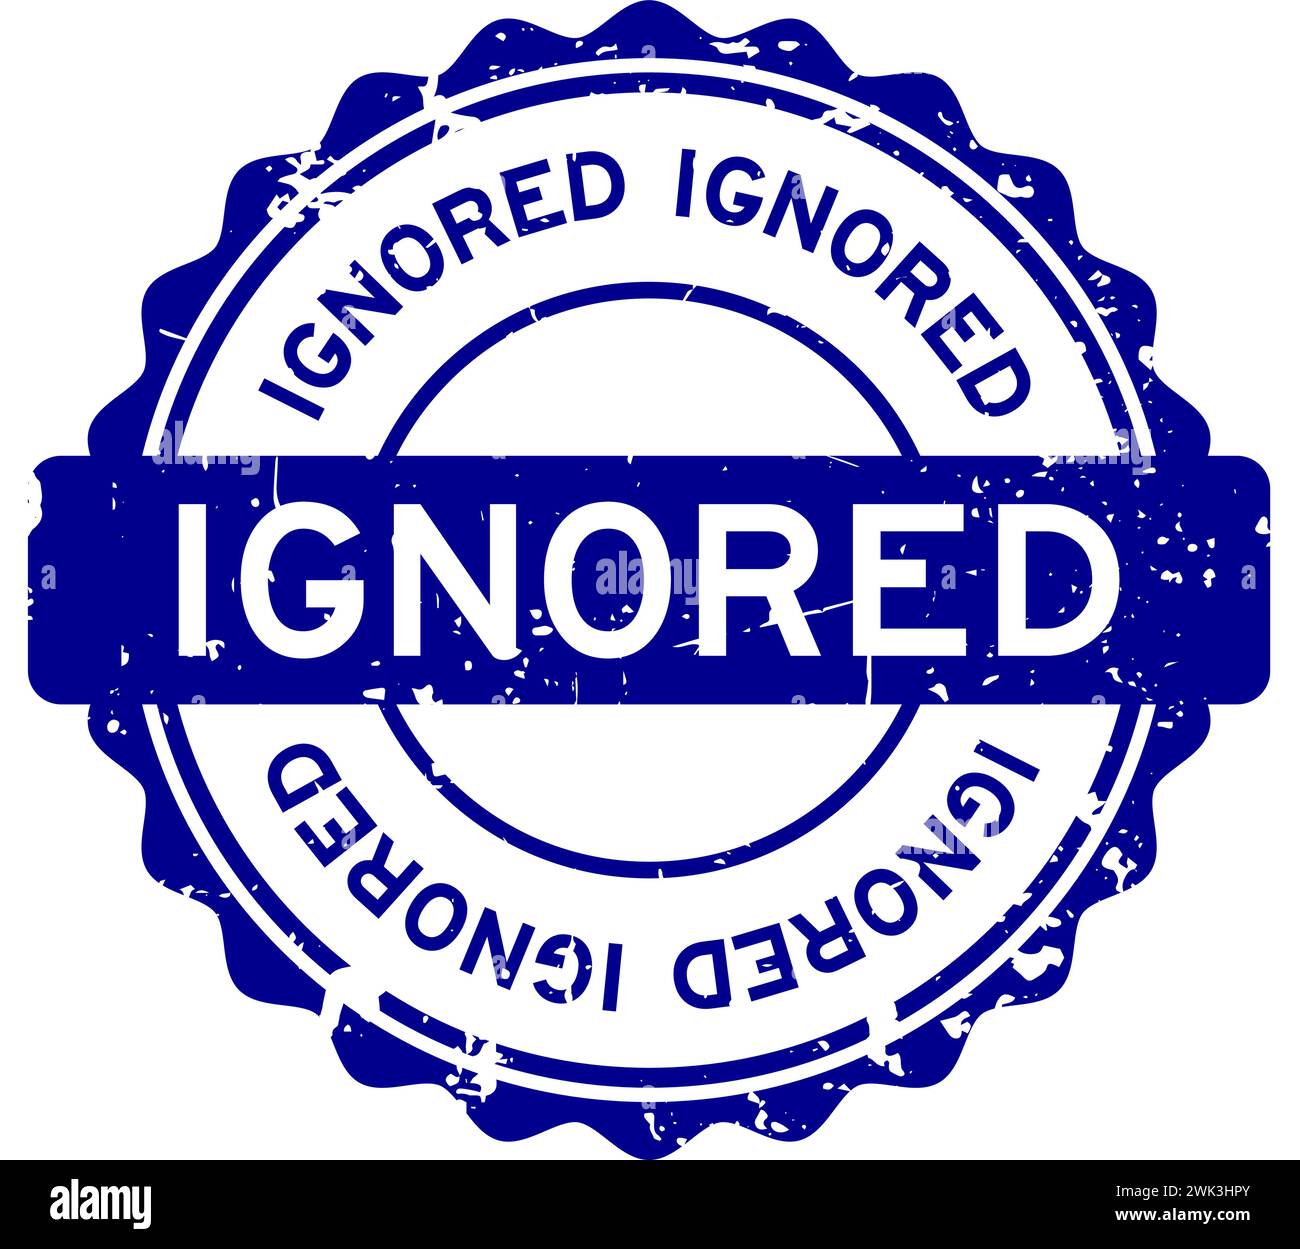 Grunge blue ignored word round rubber seal stamp on white background Stock Vector